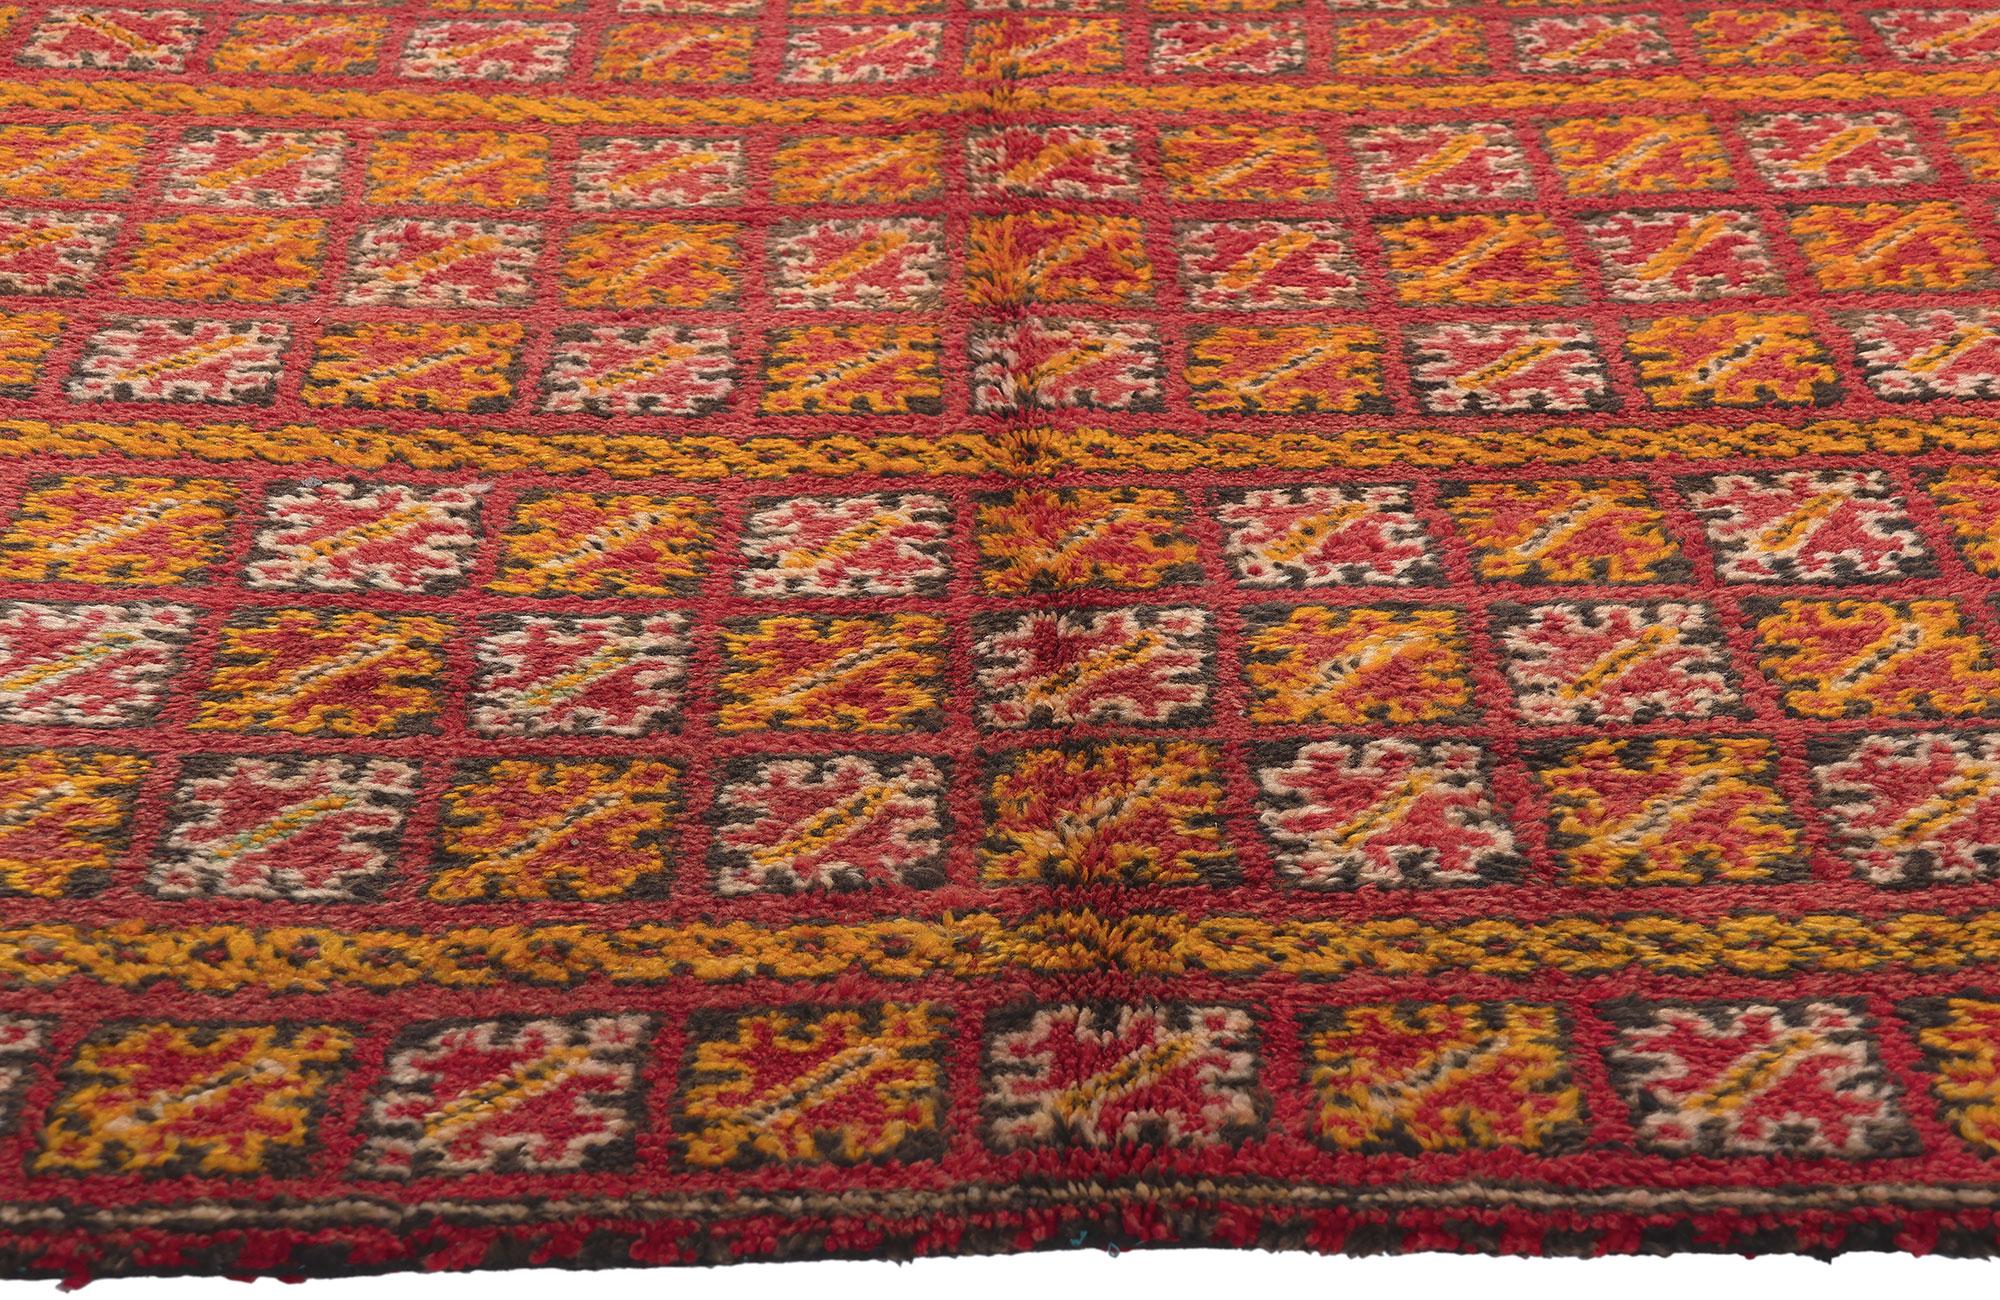 Hand-Knotted Vintage Beni MGuild Moroccan Rug, Midcentury Modern Meets Maximalist Boho For Sale